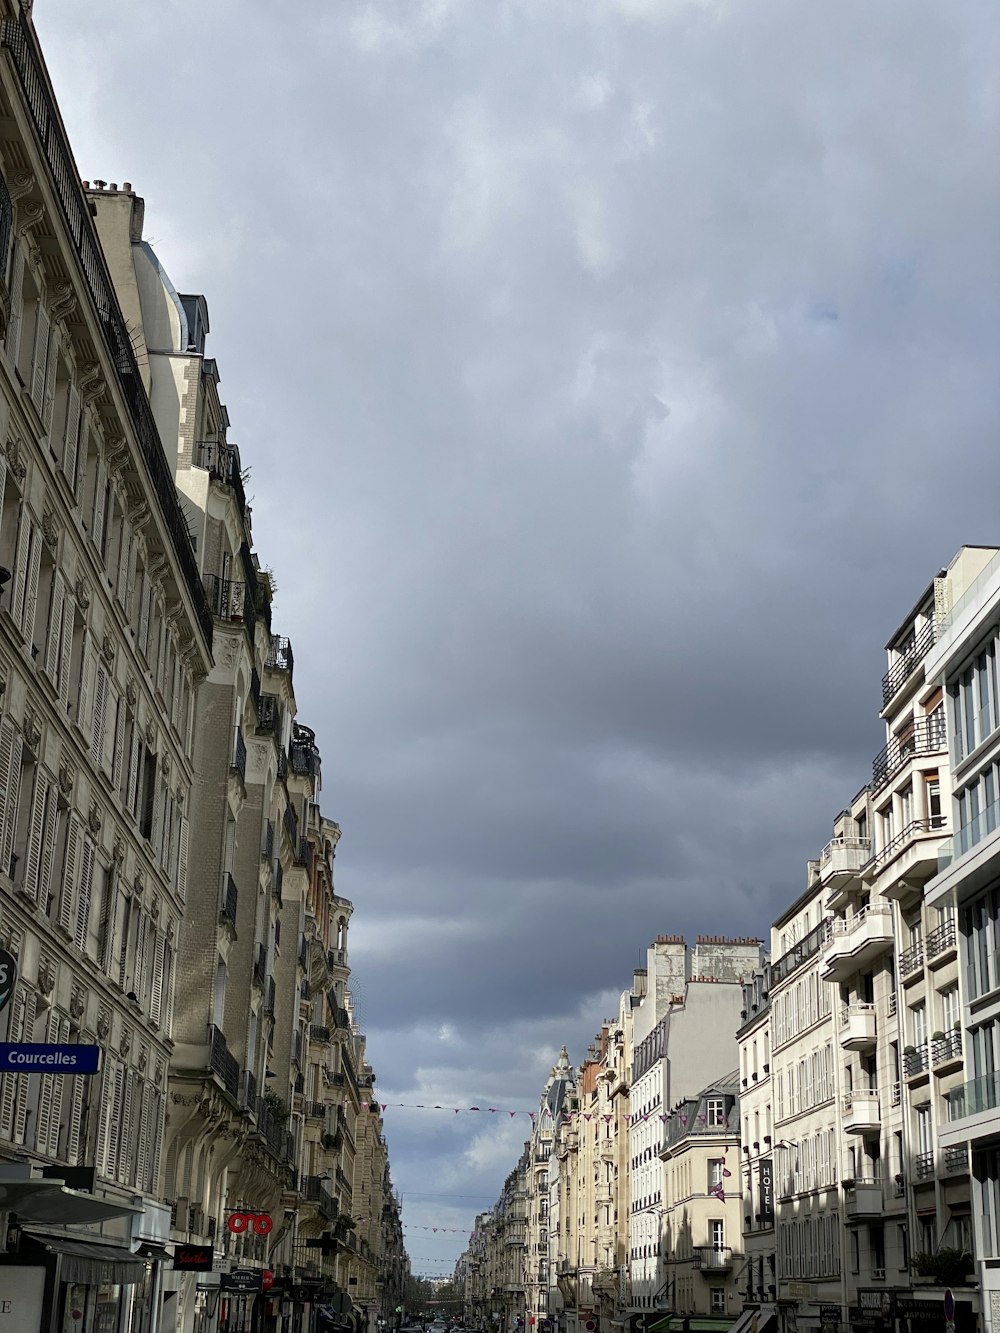 a street lined with tall buildings under a cloudy sky